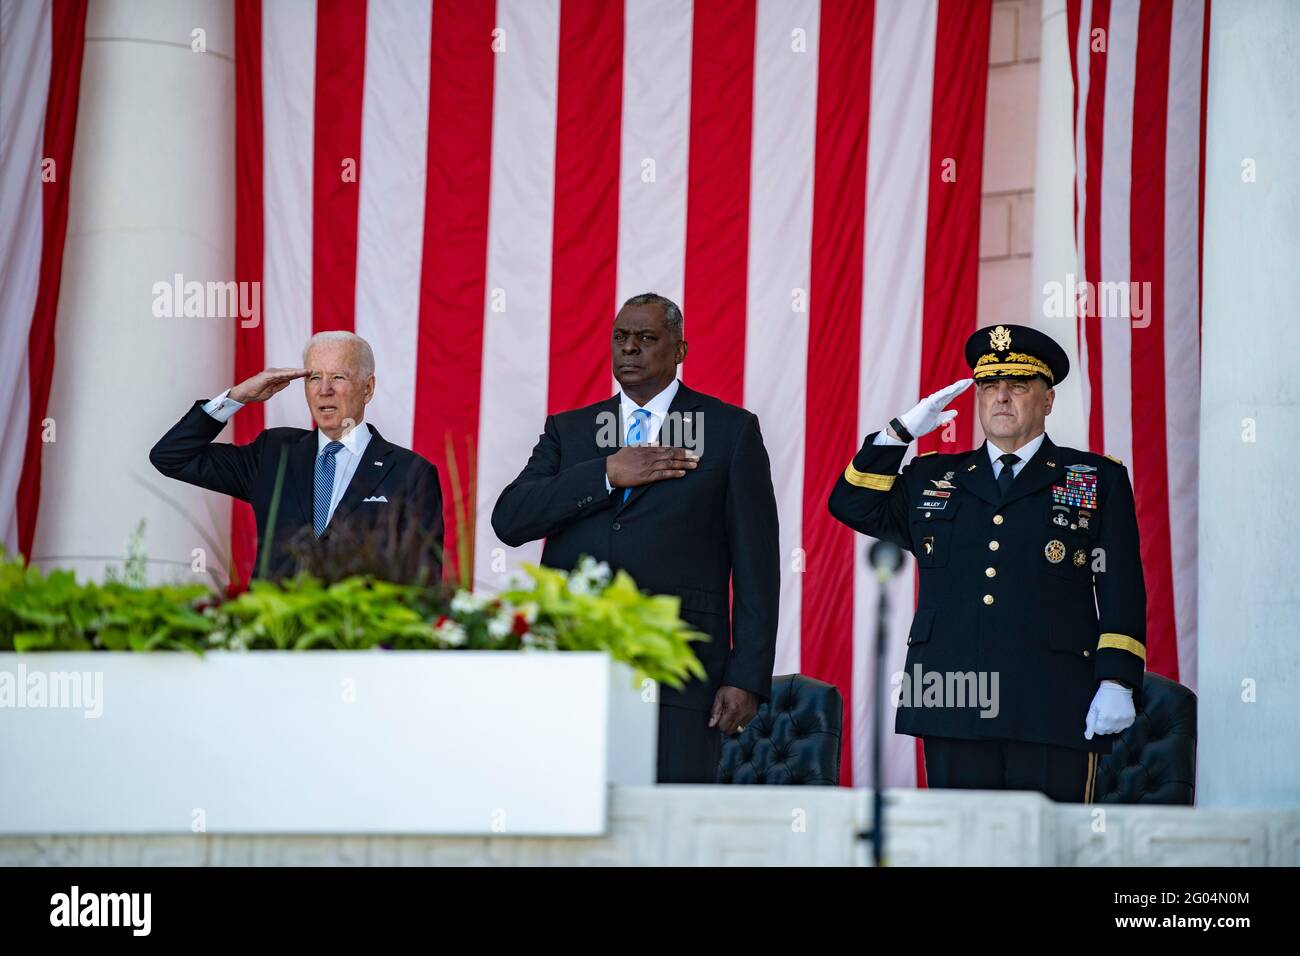 Arlington, United States Of America. 31st May, 2021. U.S President Joe Biden, Secretary of Defense Lloyd Austin and Joint Chiefs Chairman Mark Milley, render honors during the annual Memorial Day commemoration in the Memorial Amphitheater at Arlington National Cemetery May 31, 2021 Arlington, Virginia. Credit: Planetpix/Alamy Live News Stock Photo